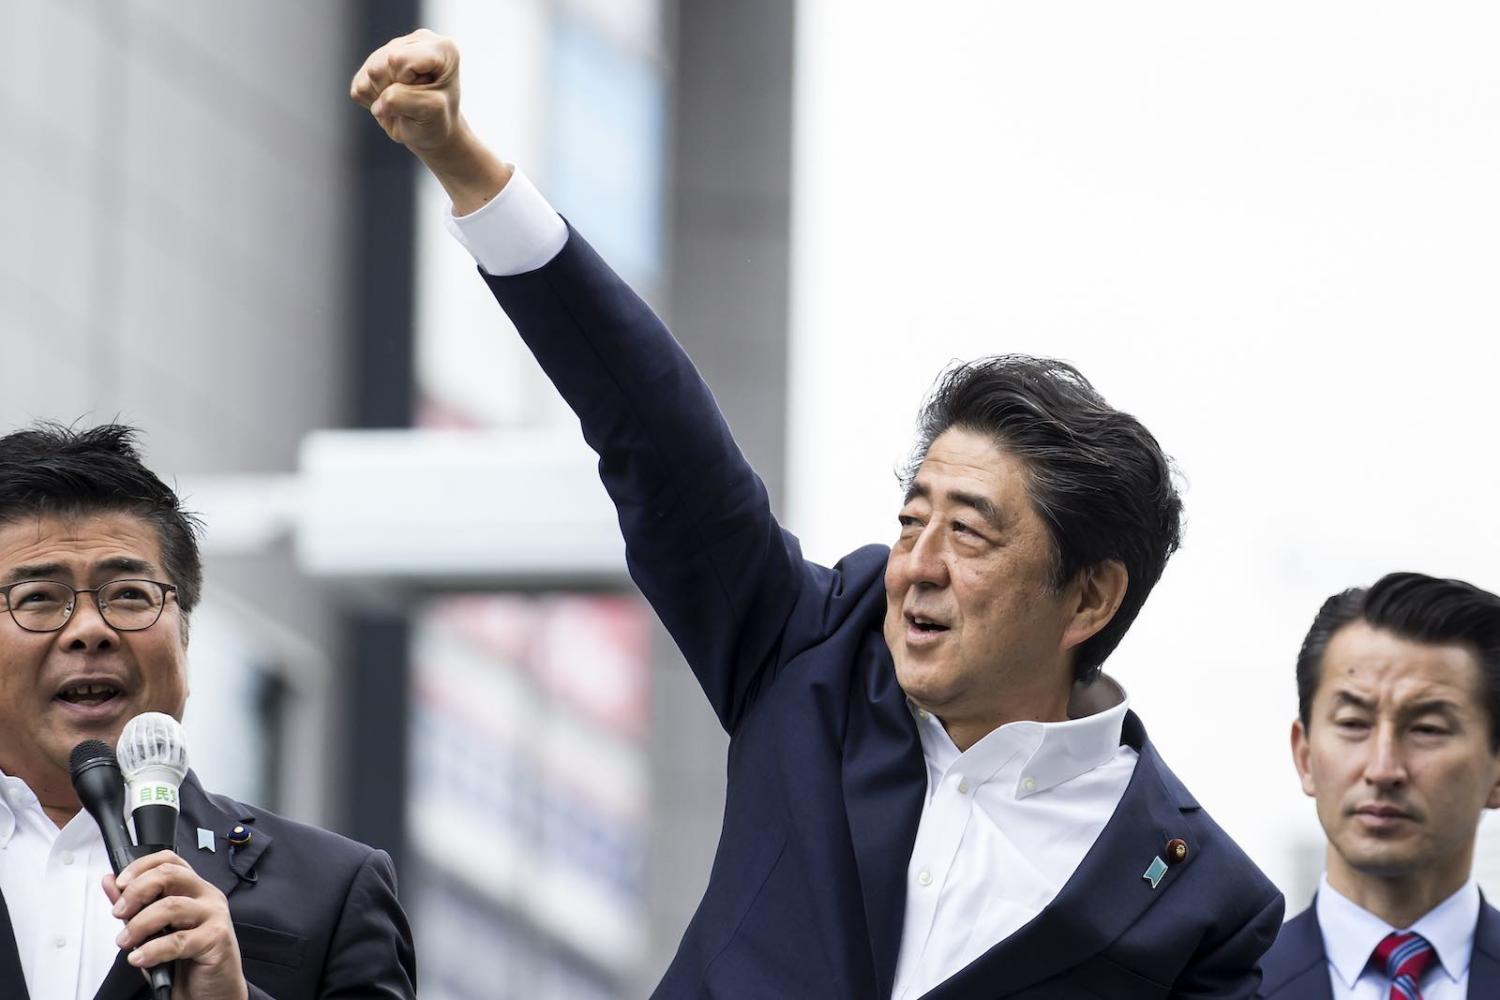 No other Japanese leader has spent as much political capital as Shinzo Abe on this politically controversial project to amend the constitution (Photo: Tomohiro Ohsumi/Getty)